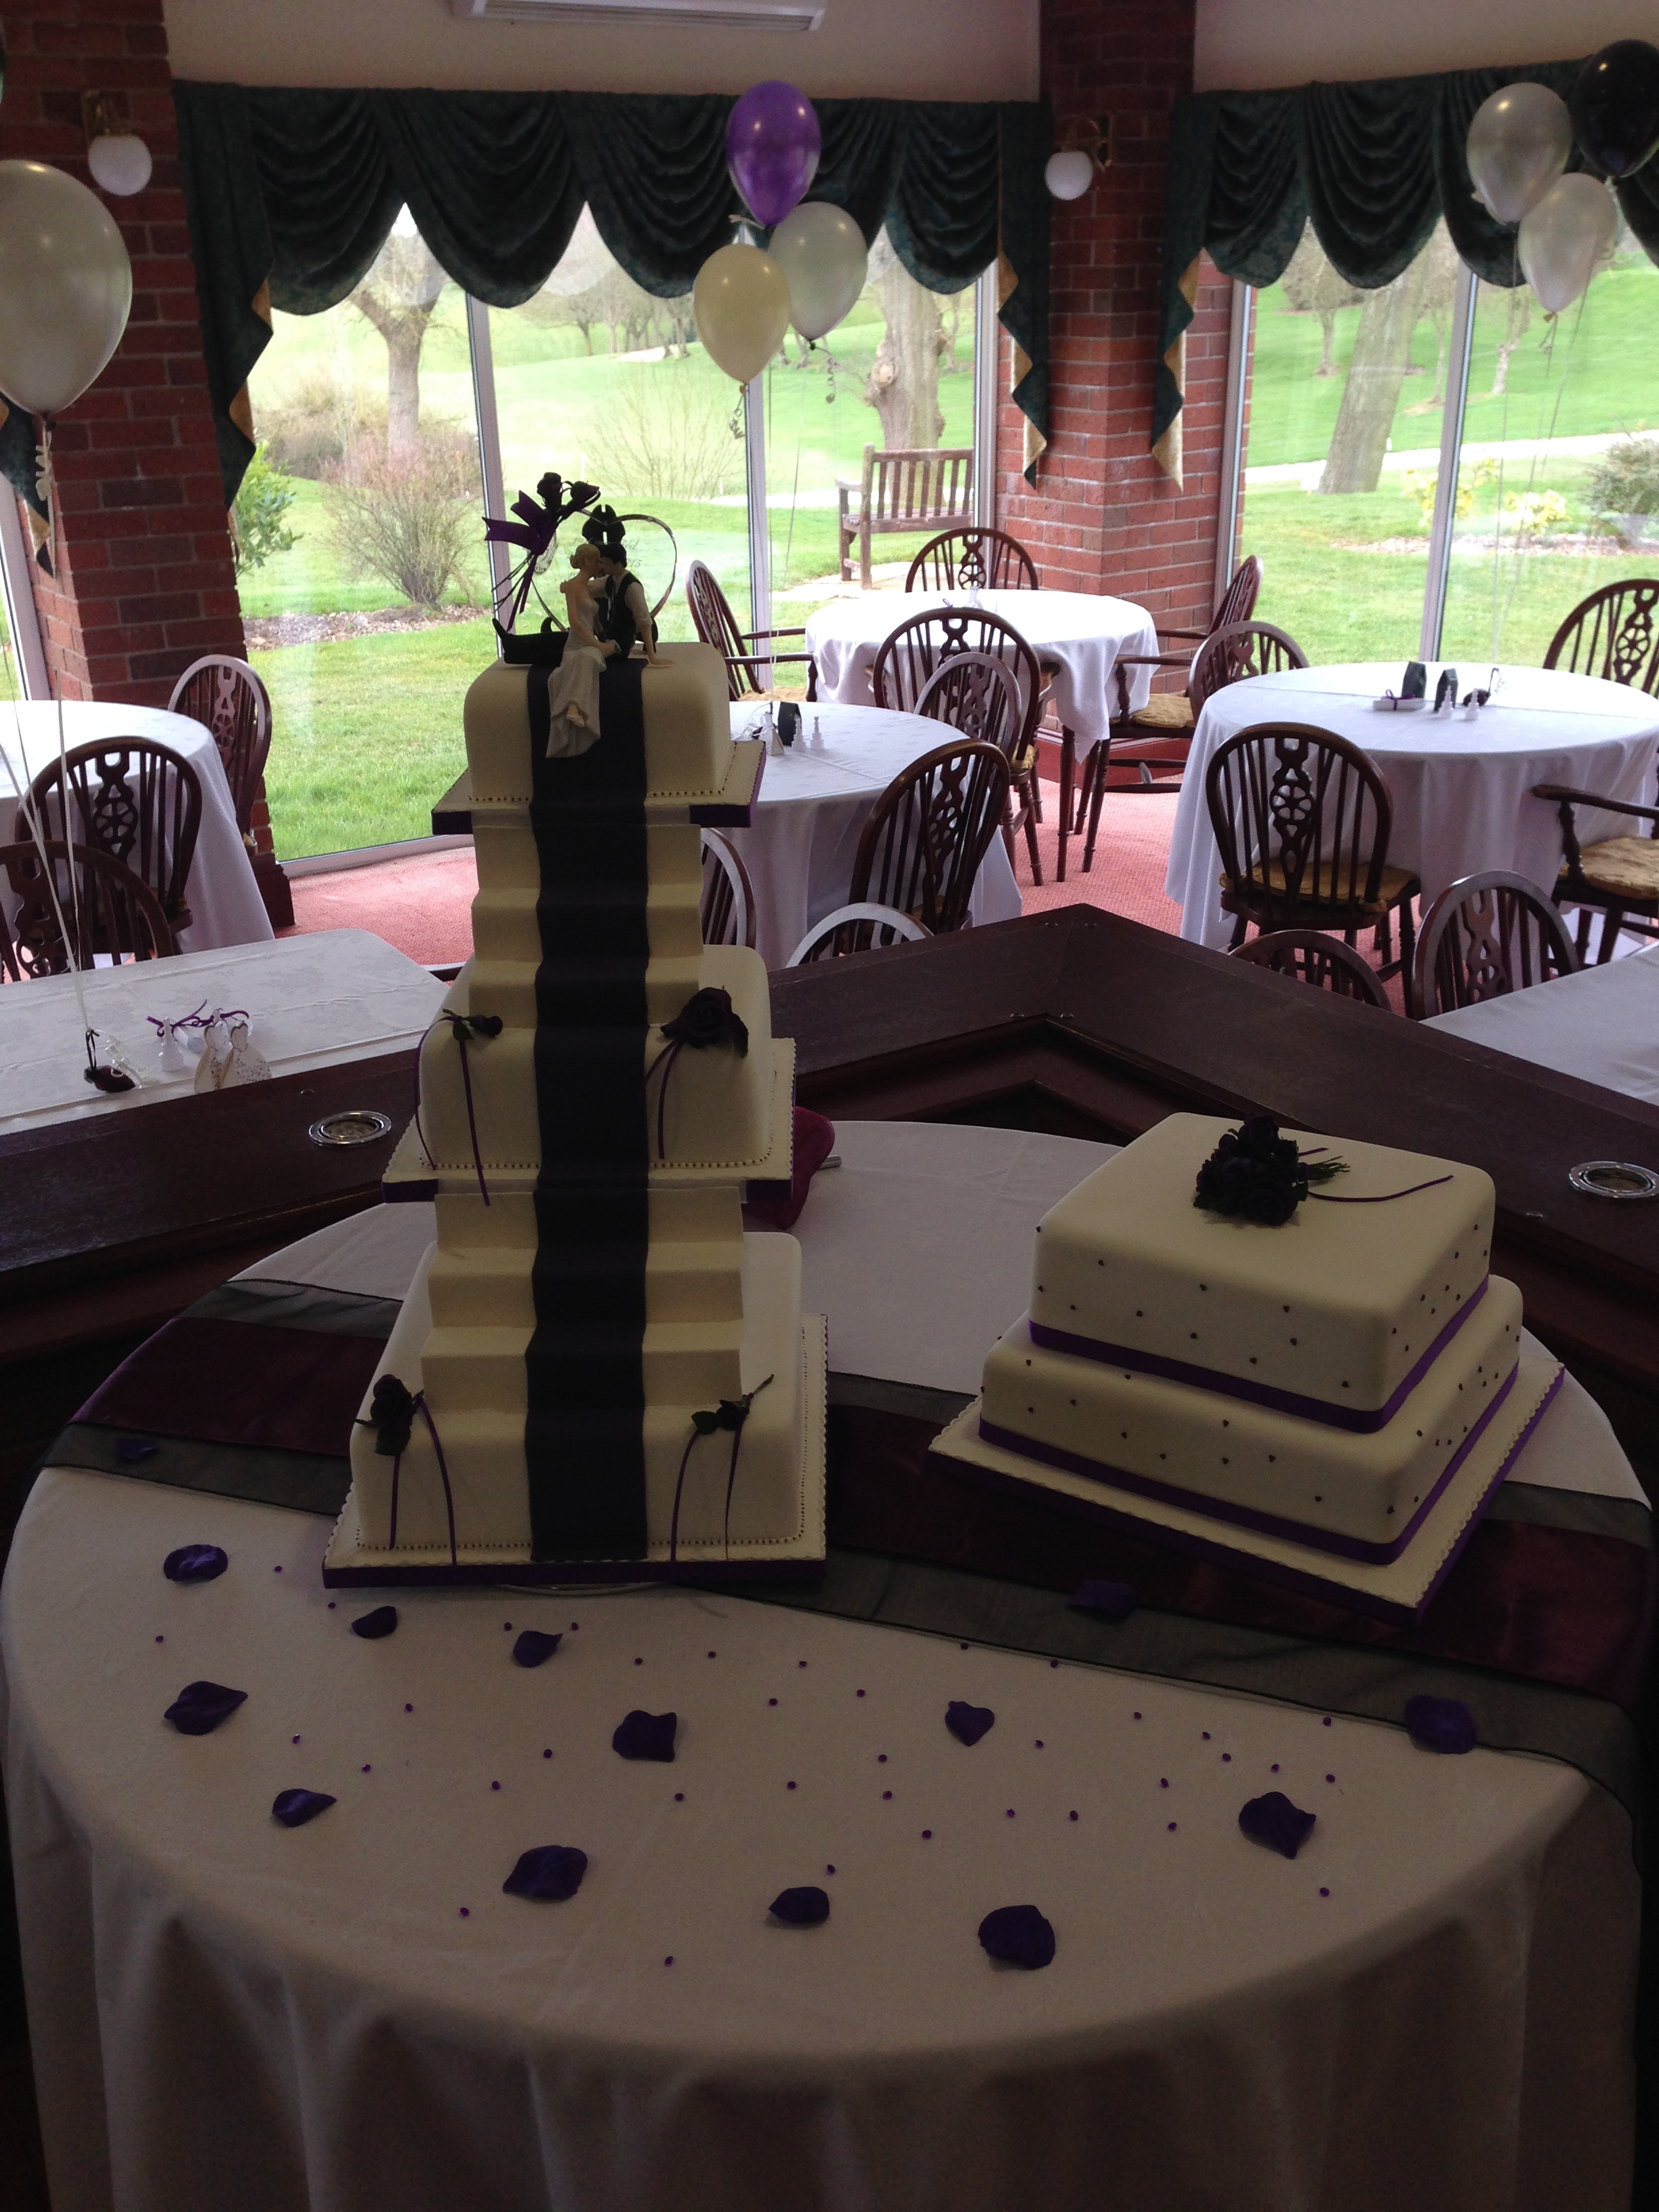 3 tier steps wedding cake and cutting cake